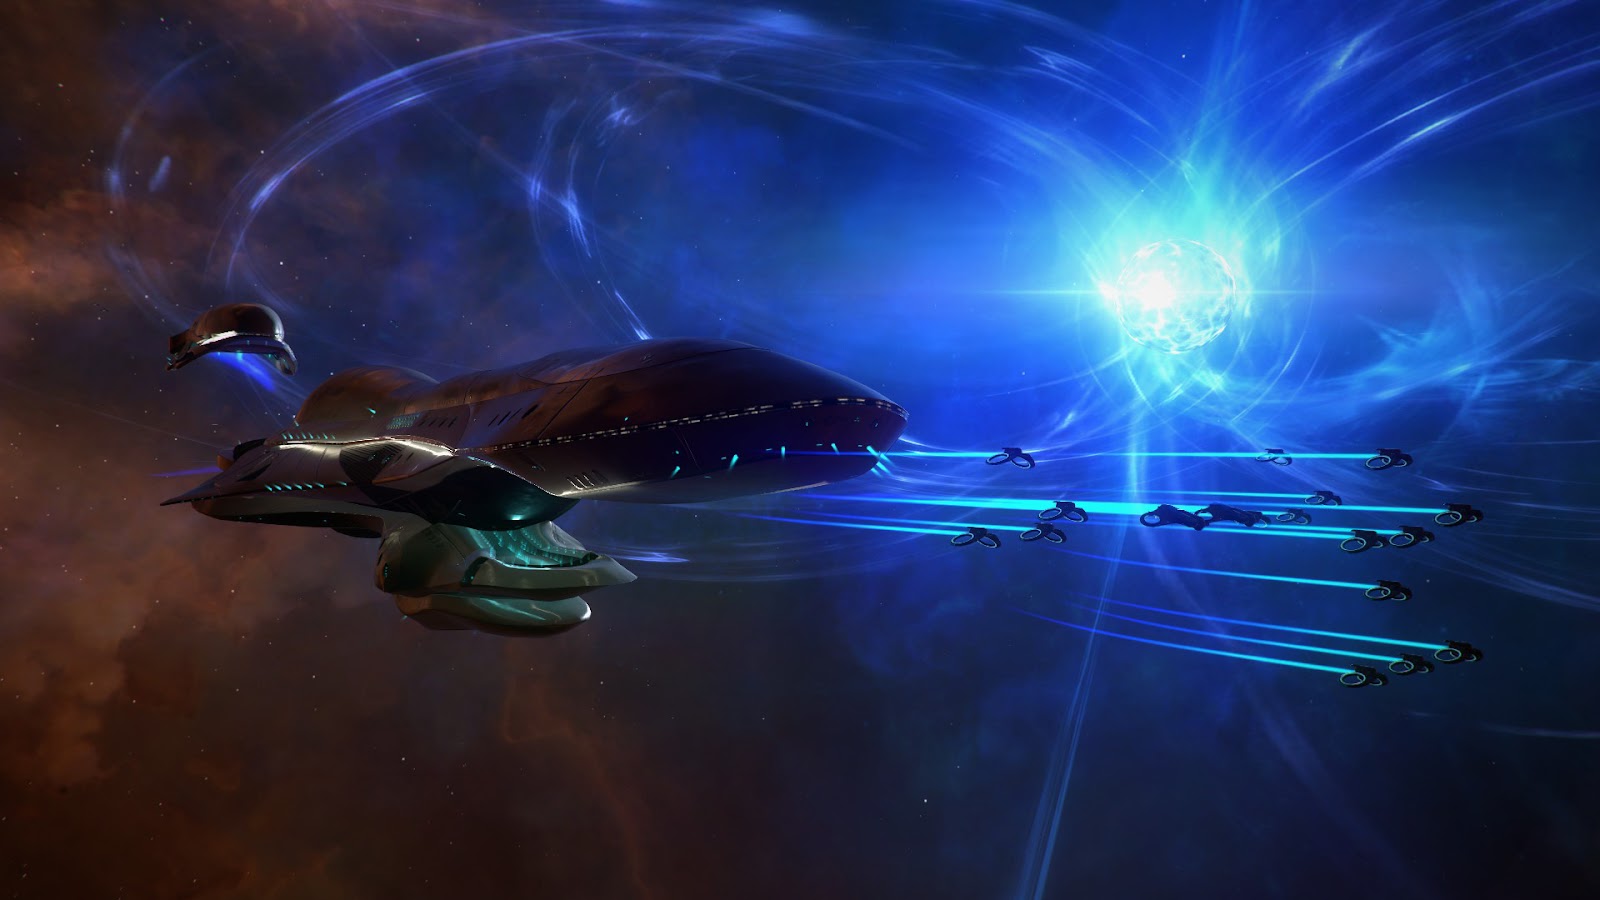 Screenshot of Endless Space 2 showing multiple ships